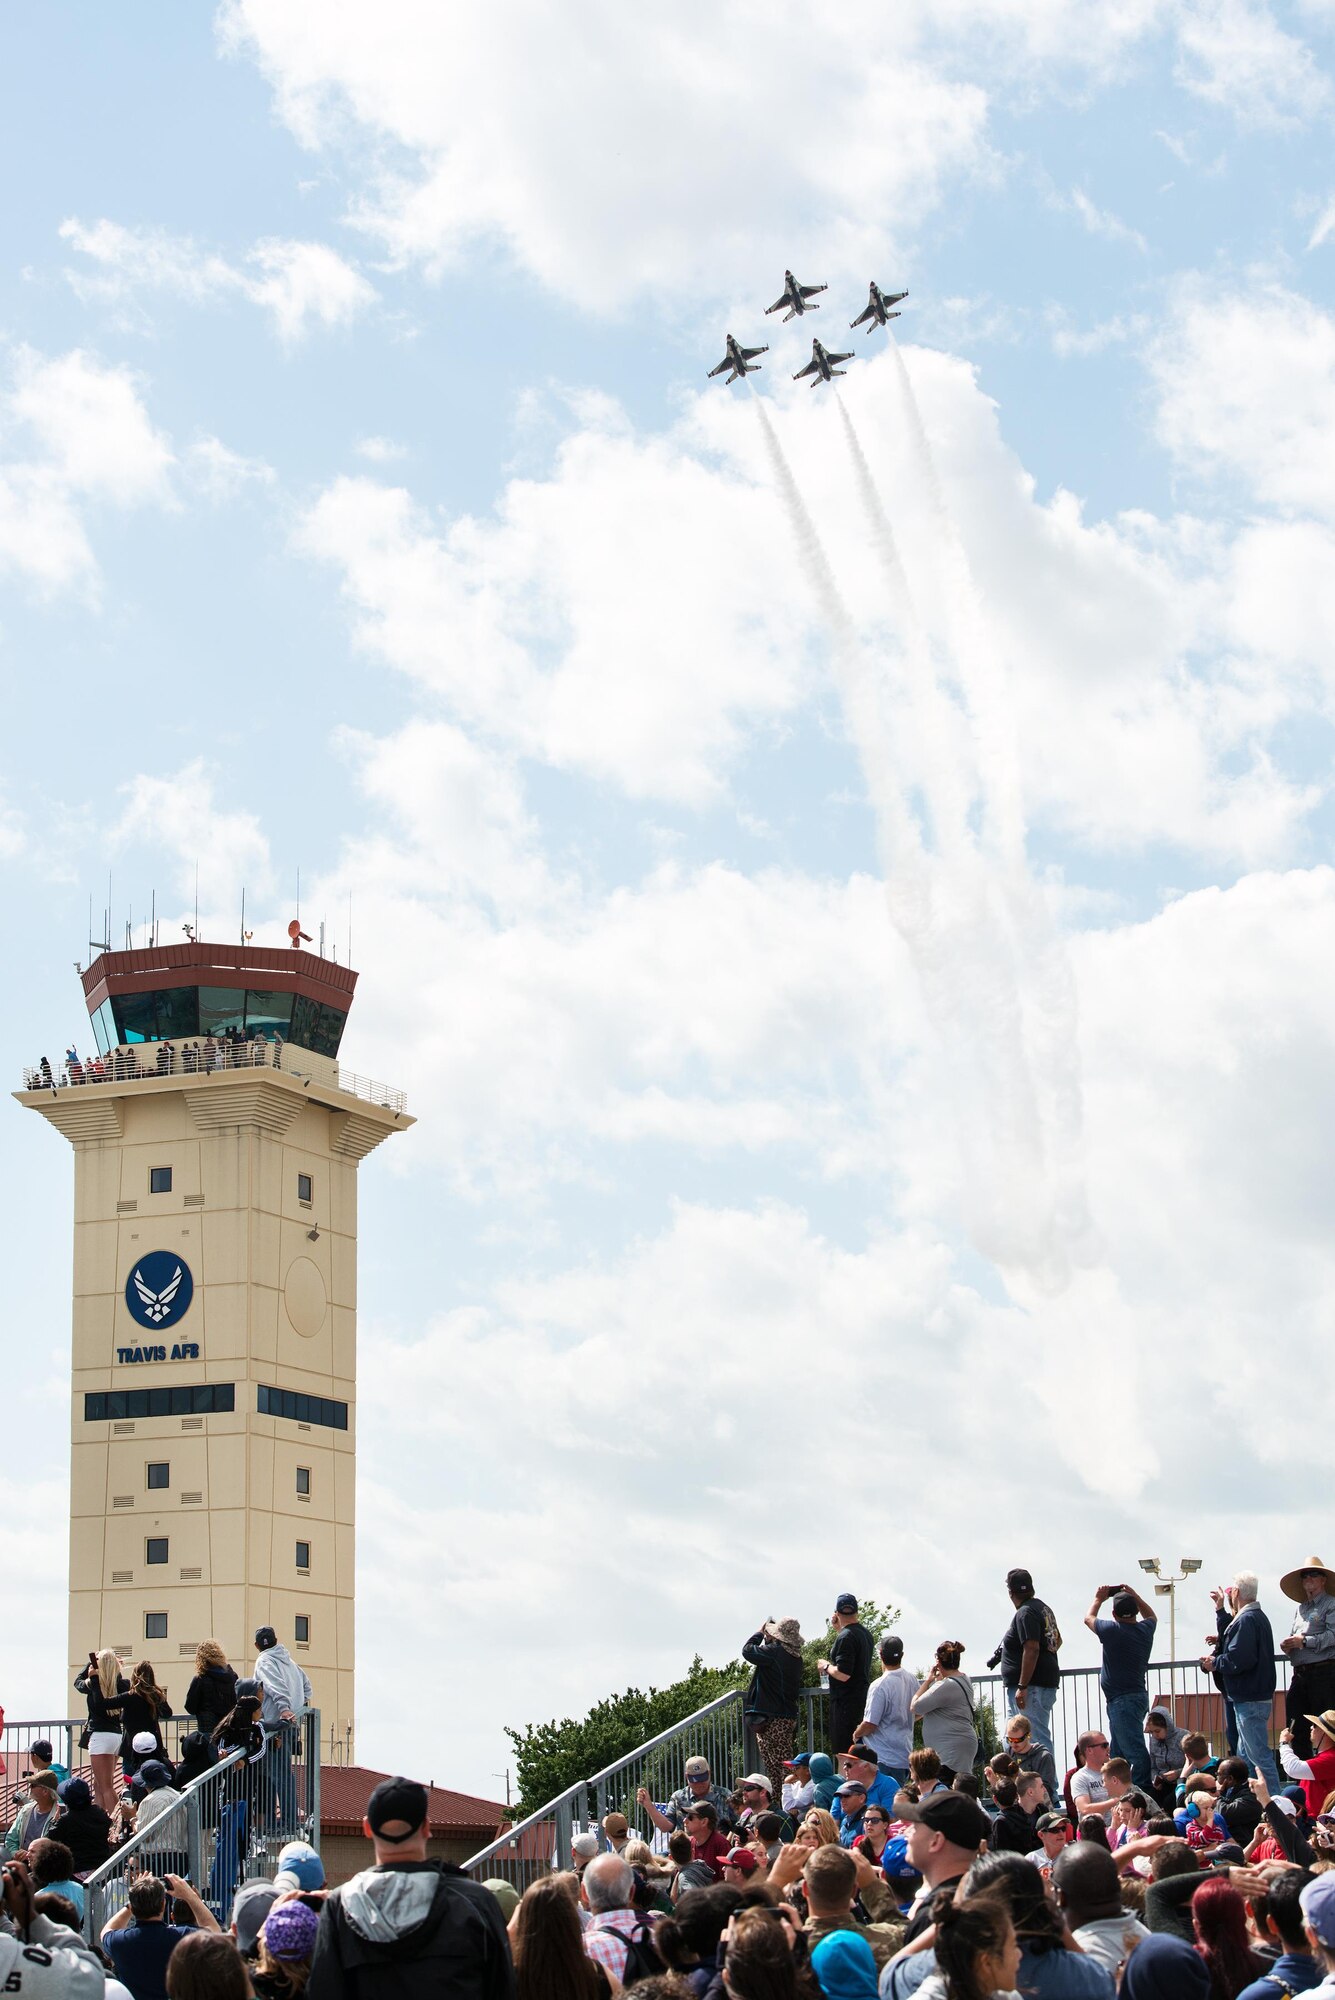 The U.S. Air Force Thunderbirds perform an aerial demonstration during the Wings over Solano Air Show at Travis Air Force Base, Calif., May 6, 2017. The two-day event also featured performances by the U.S. Army Golden Knights parachute team, flyovers and static displays. (U.S. Air Force photo by Louis Briscese)